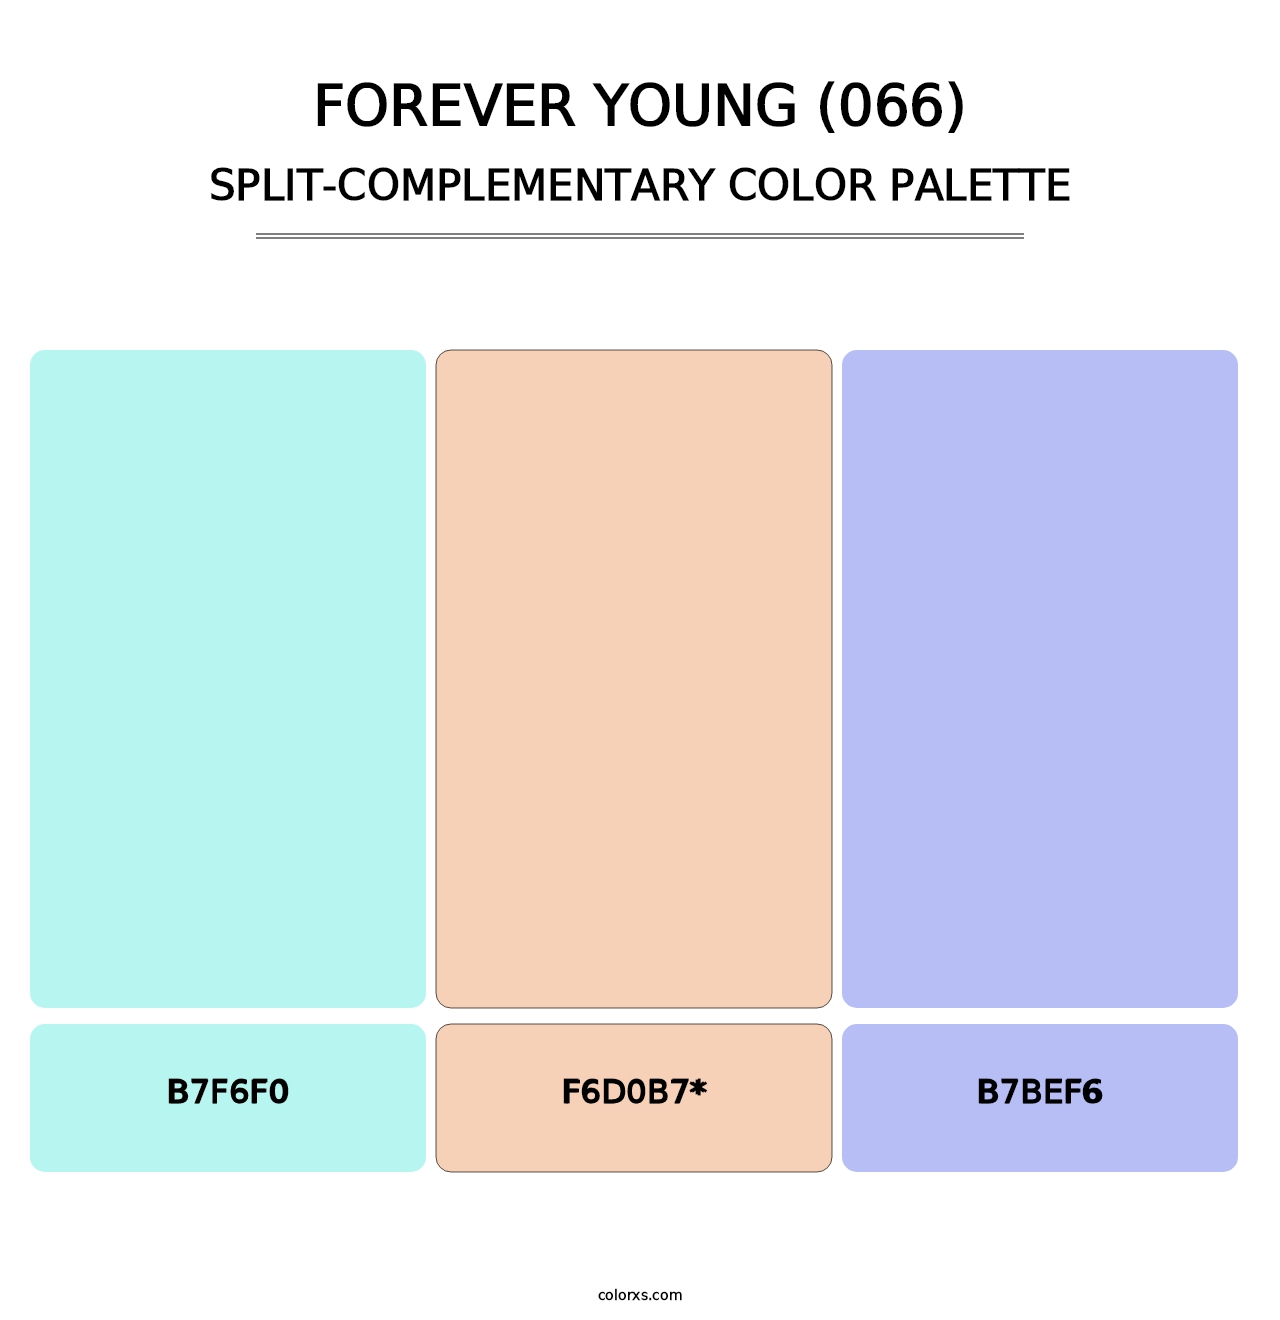 Forever Young (066) - Split-Complementary Color Palette